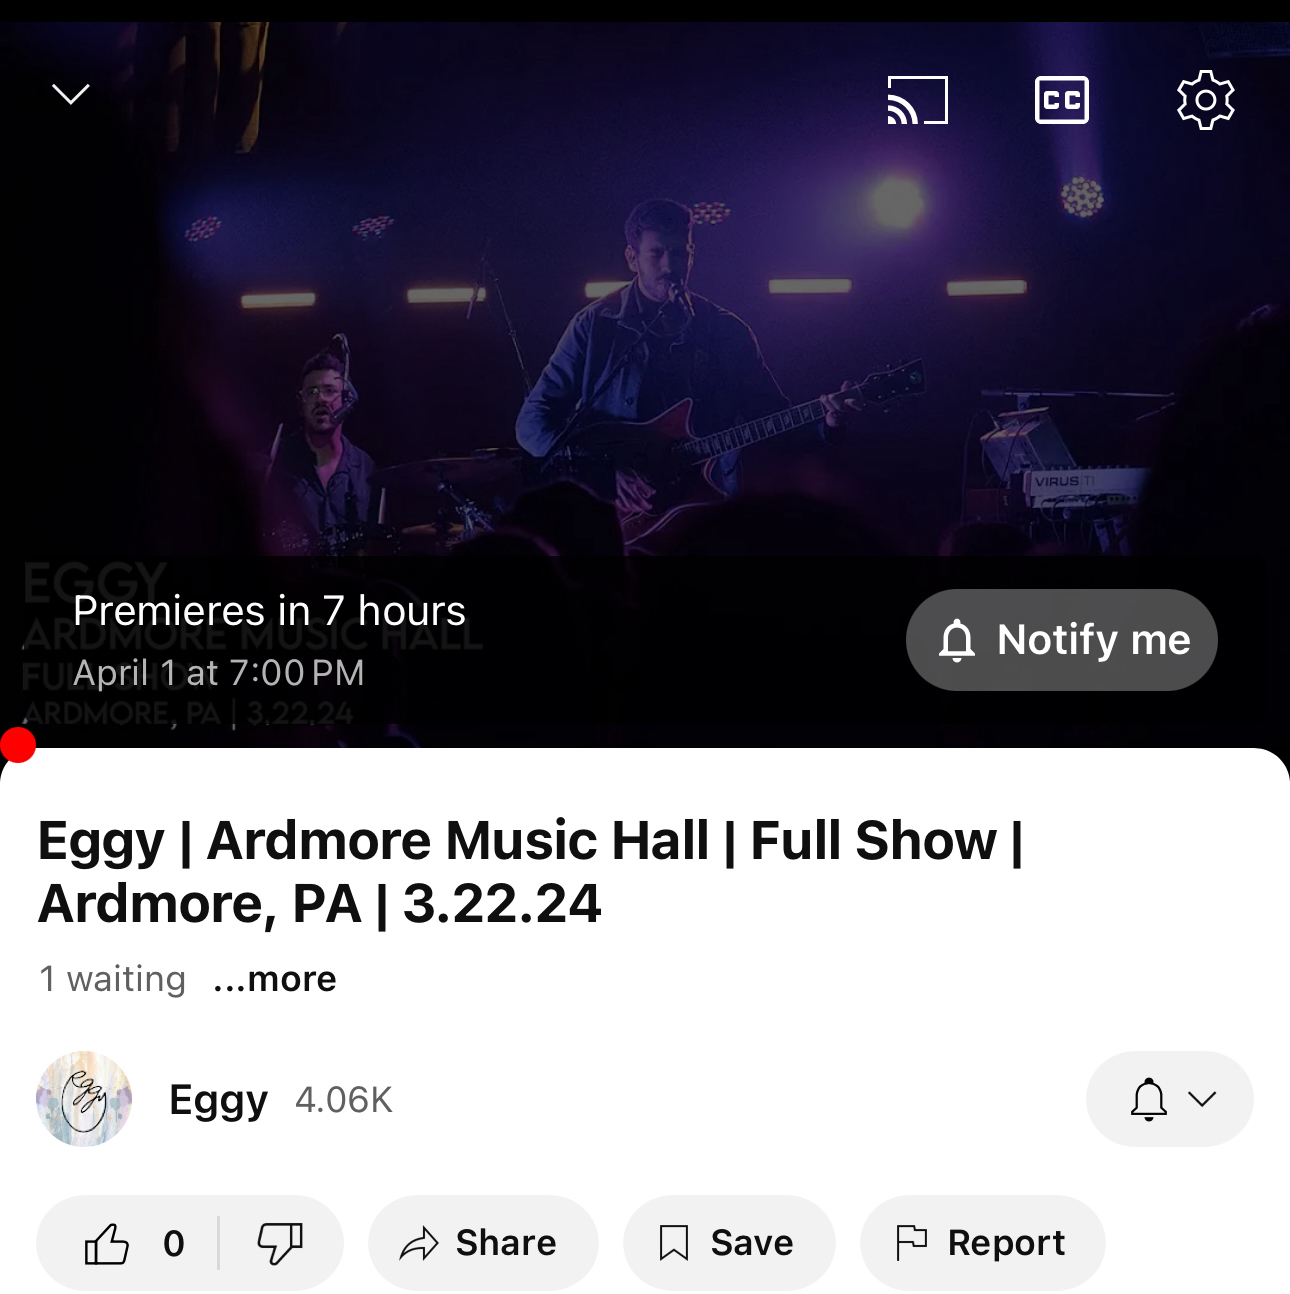 Screenshot of a YouTube video premiere announcement featuring musicians on stage, one with a guitar, under purple stage lighting with text indicating the artist “Eggy,” location “Ardmore Music Hall,” and date of the full show as “3.22